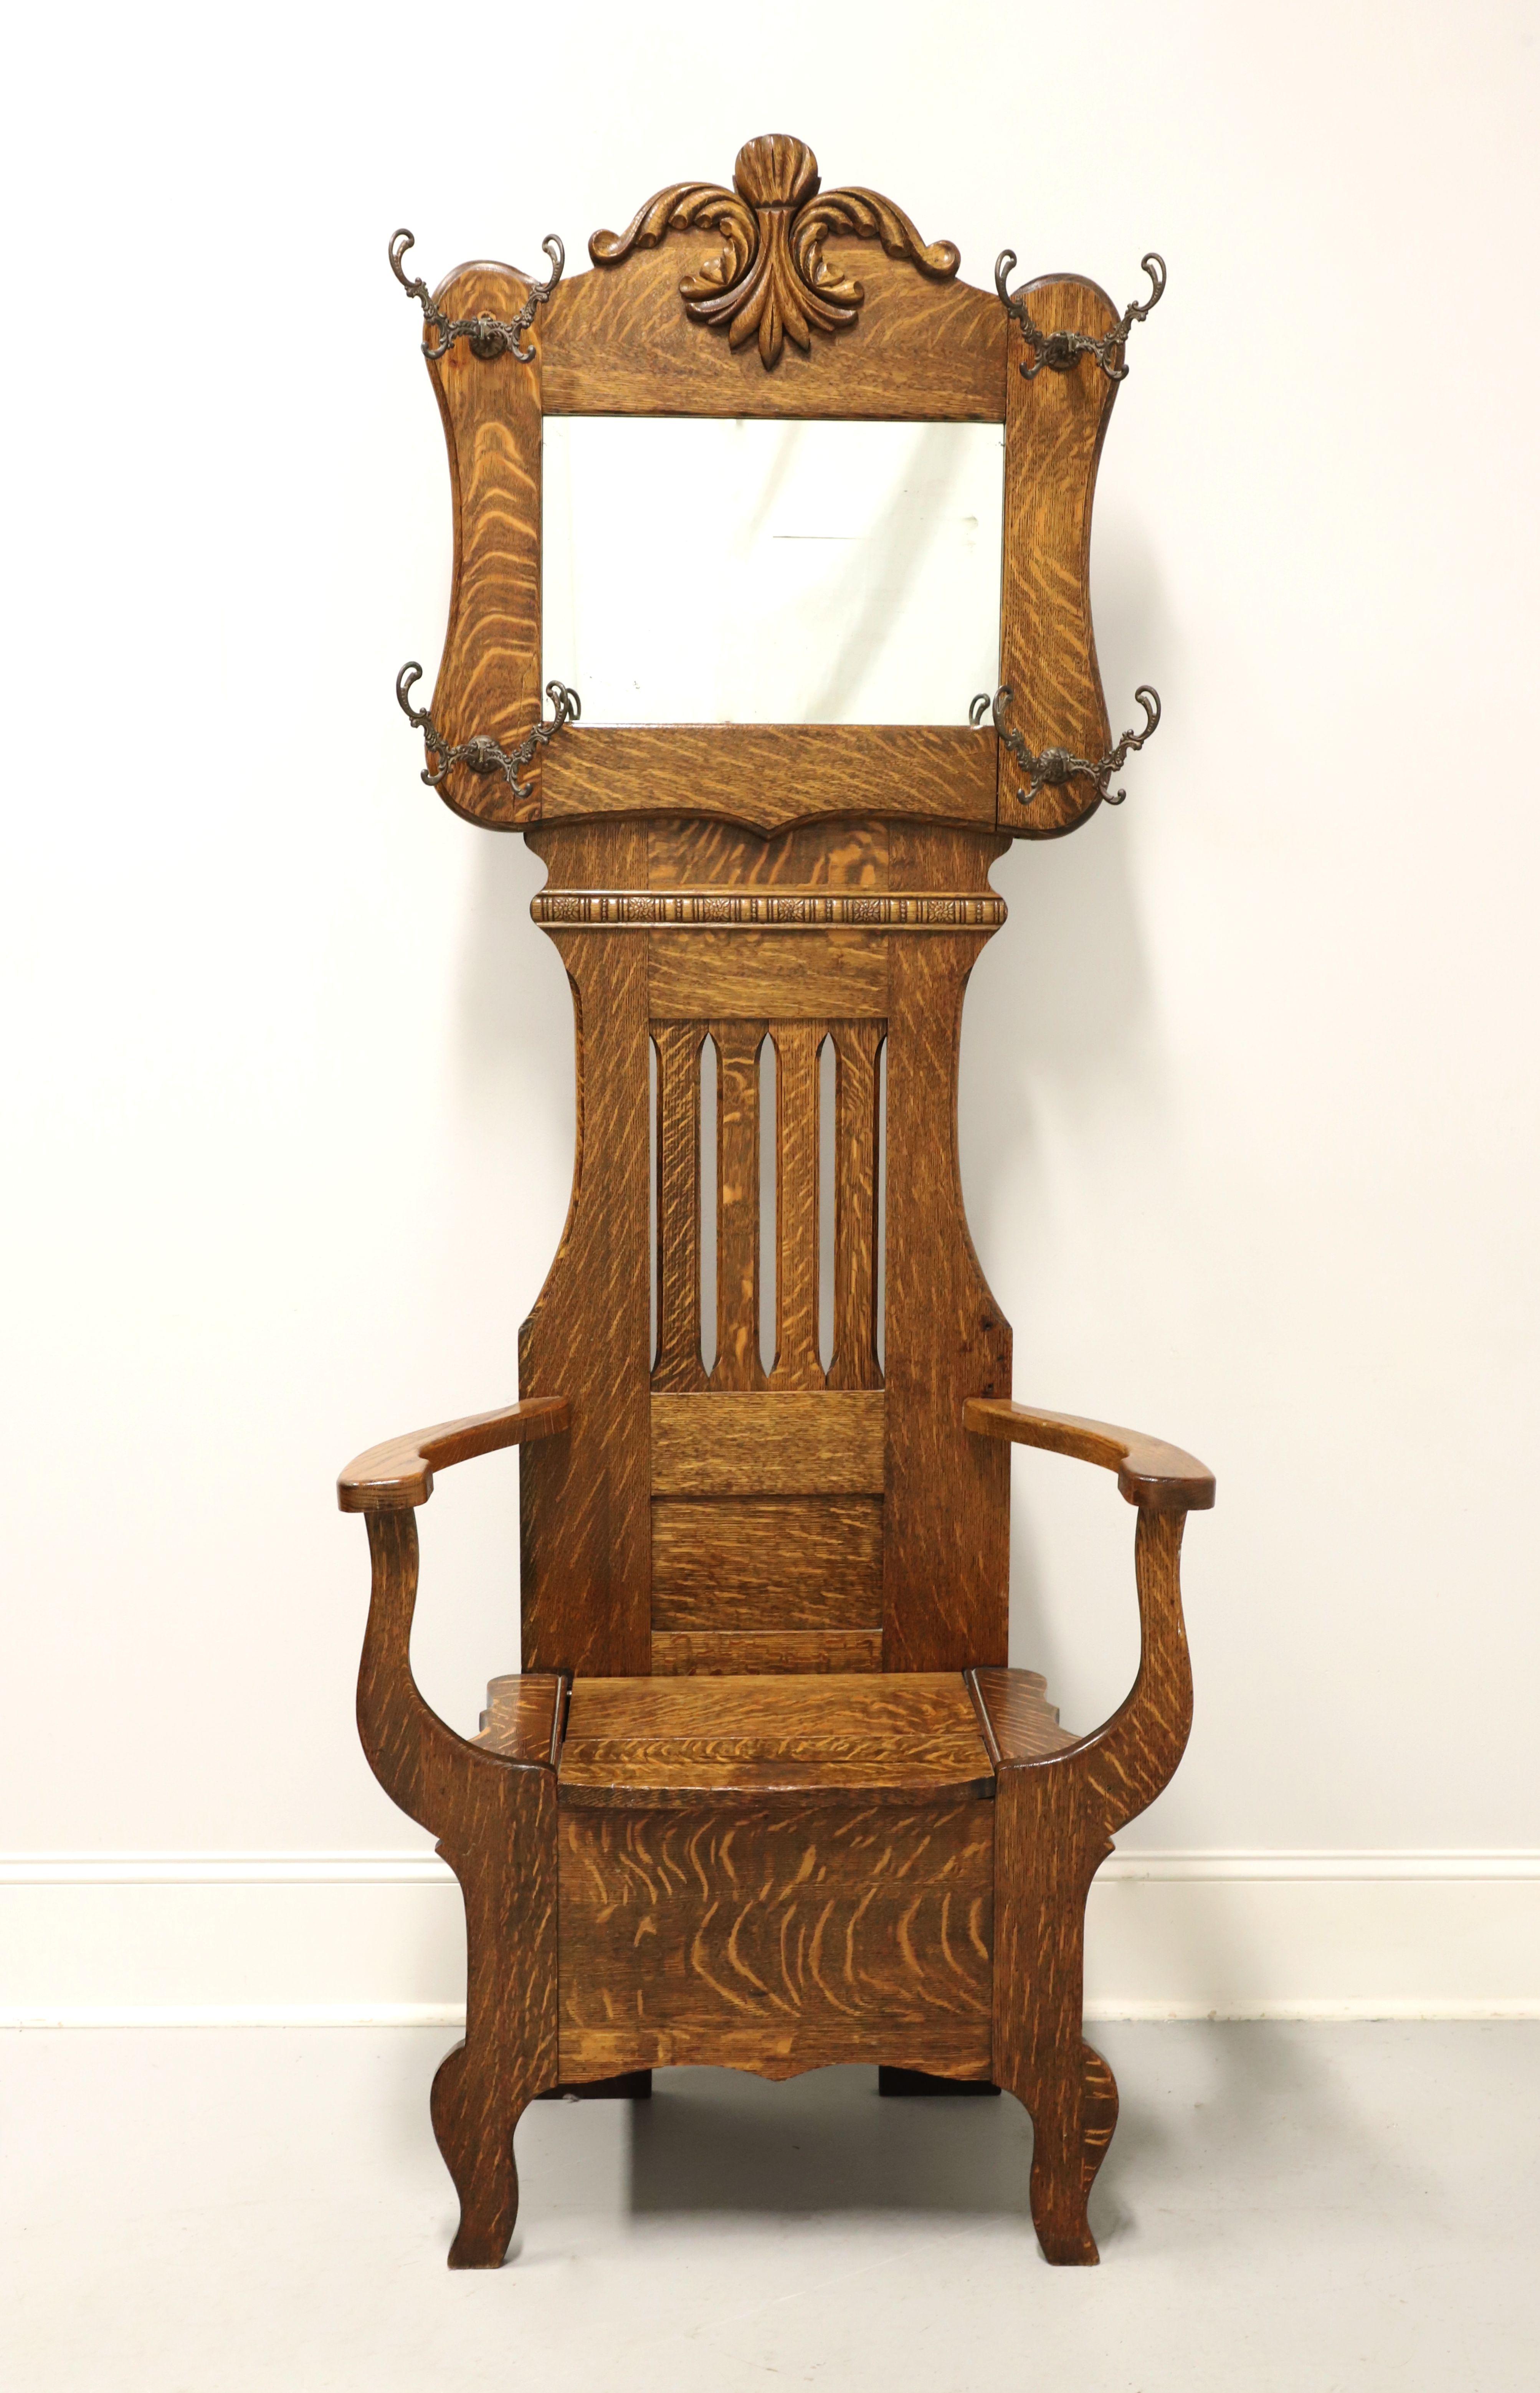 Antique Circa 1900 Victorian Period Tiger Oak Hall Tree with Chair Bench For Sale 4